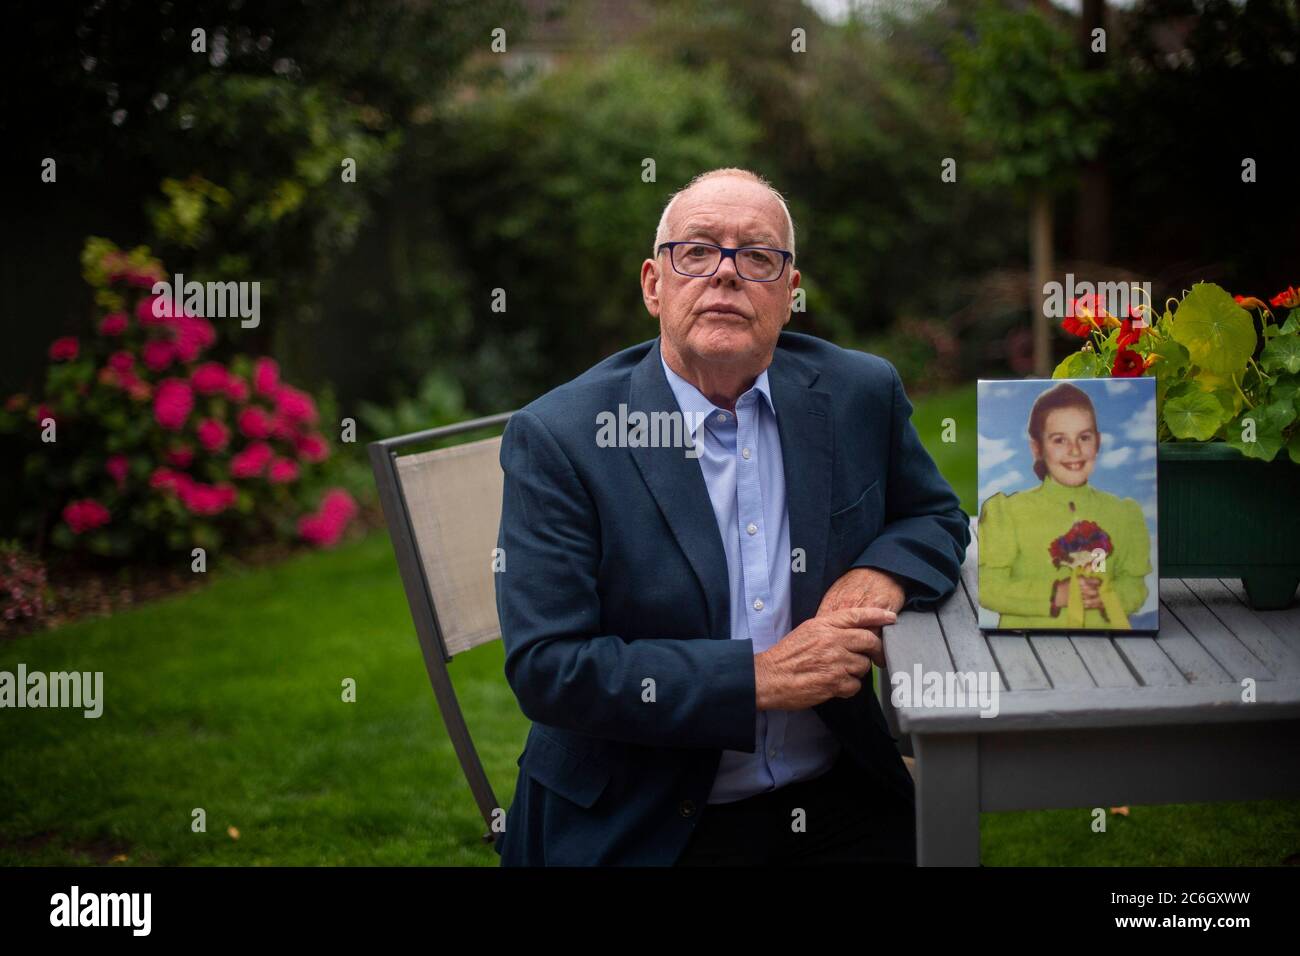 Michael O'Hare, who has vowed to fight for justice for his sister Majella O'Hare who was shot dead by the Army in Co Armagh 44 years ago, pictured at his home in north west London. The family of 12-year-old Majella O'Hare, who was shot in the back whilst walking to church in Whitecross, Co Armagh on August 14 1976, have called for an independent investigation into her death. Stock Photo